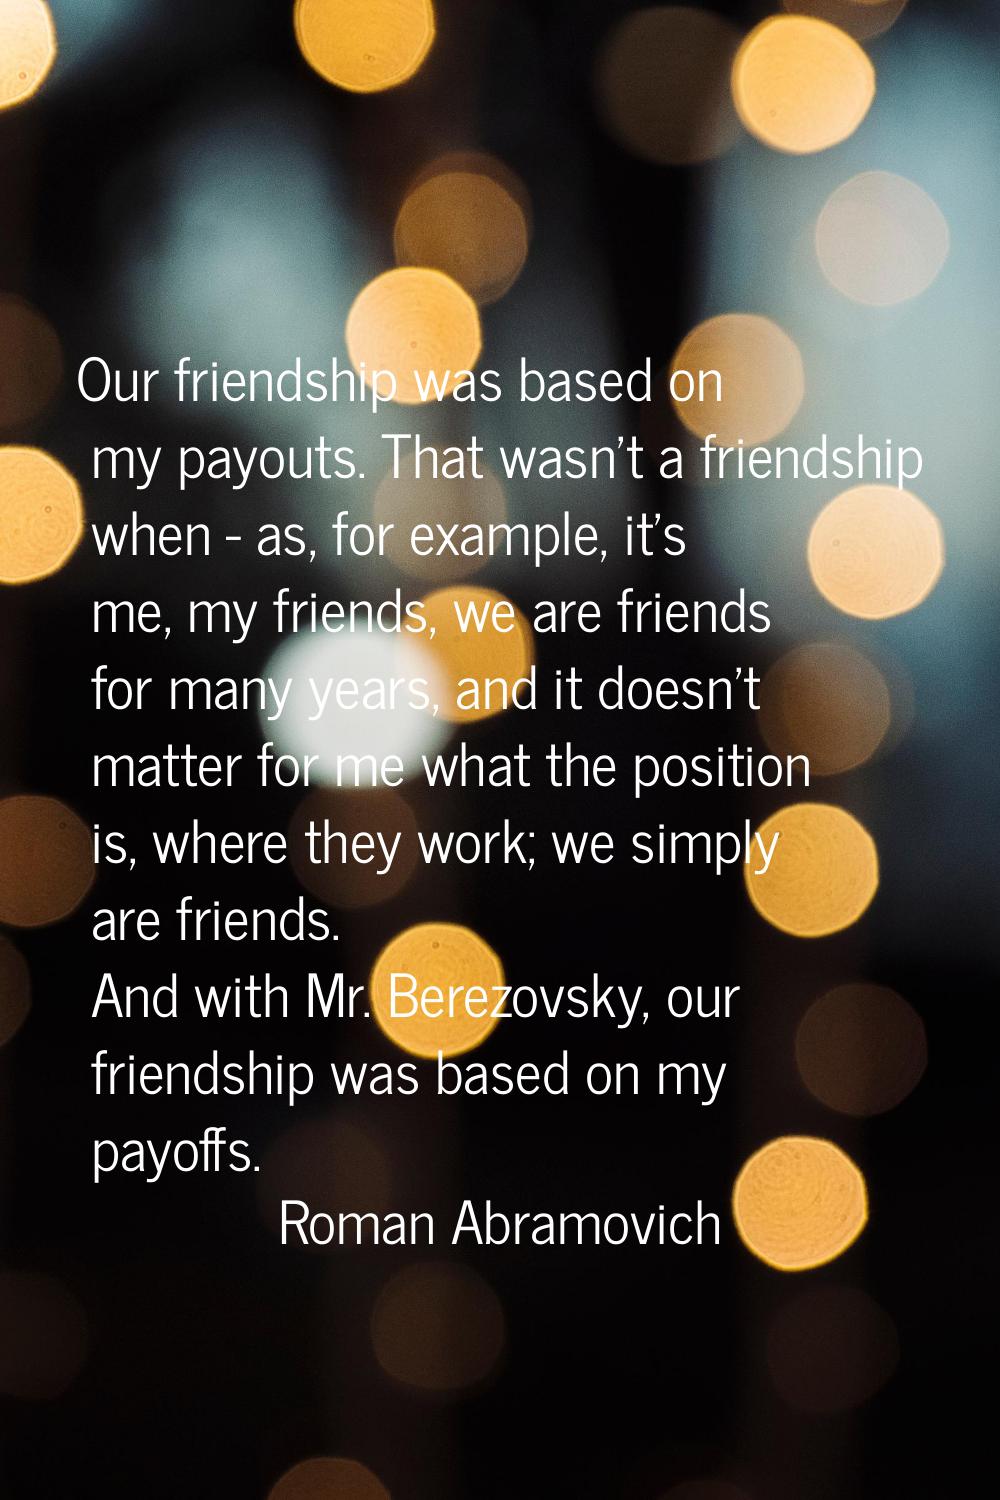 Our friendship was based on my payouts. That wasn't a friendship when - as, for example, it's me, m